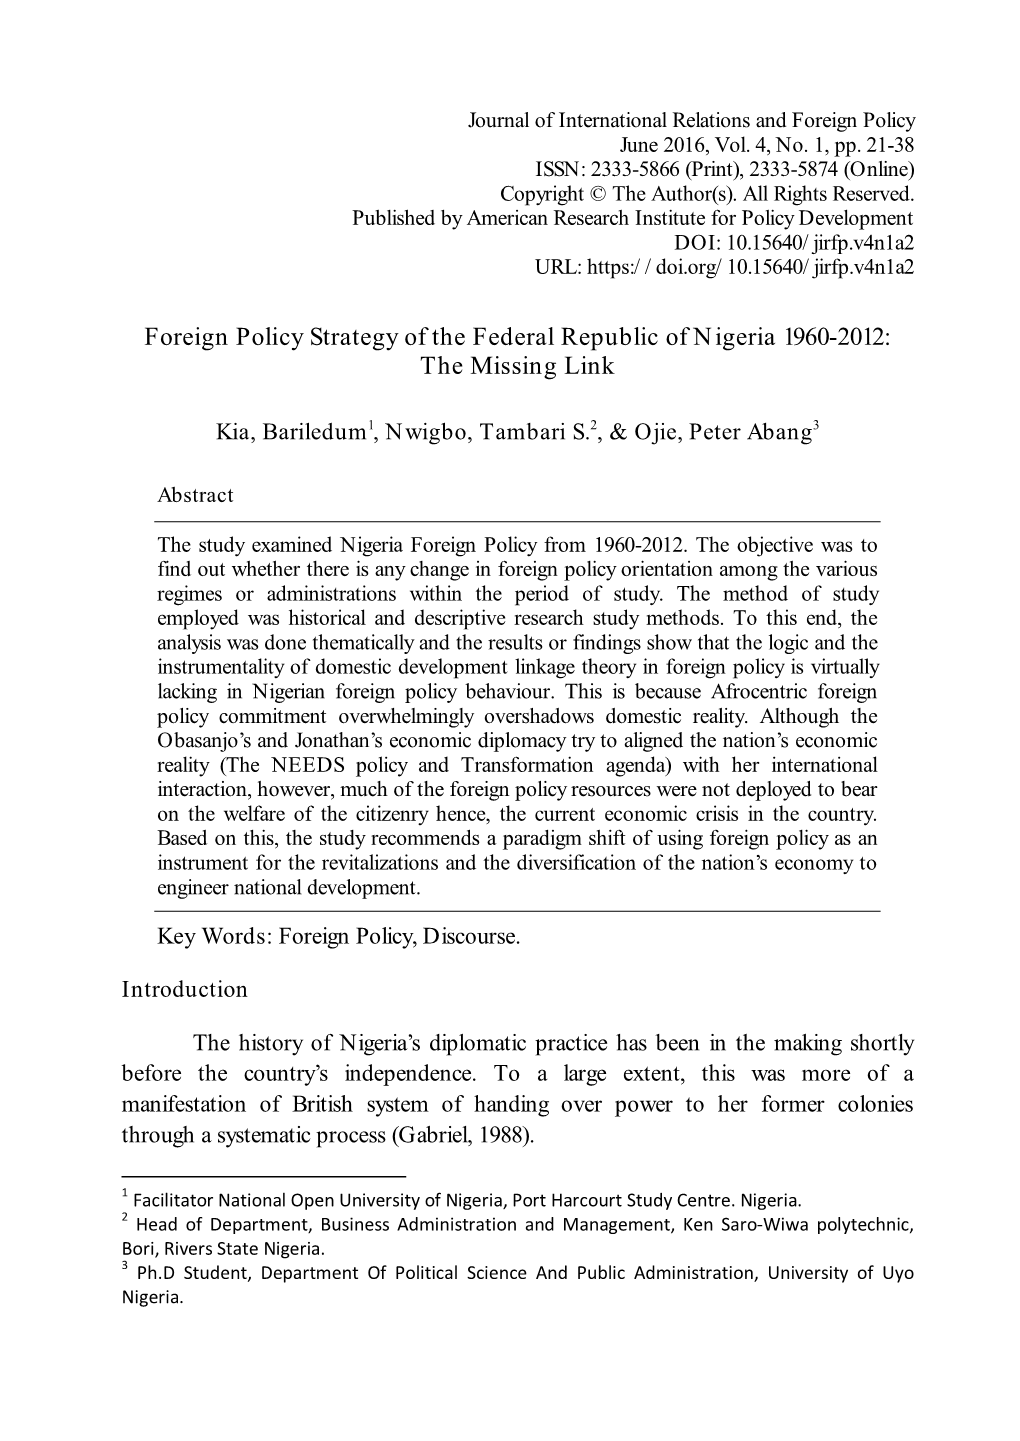 Foreign Policy Strategy of the Federal Republic of Nigeria 1960-2012: the Missing Link